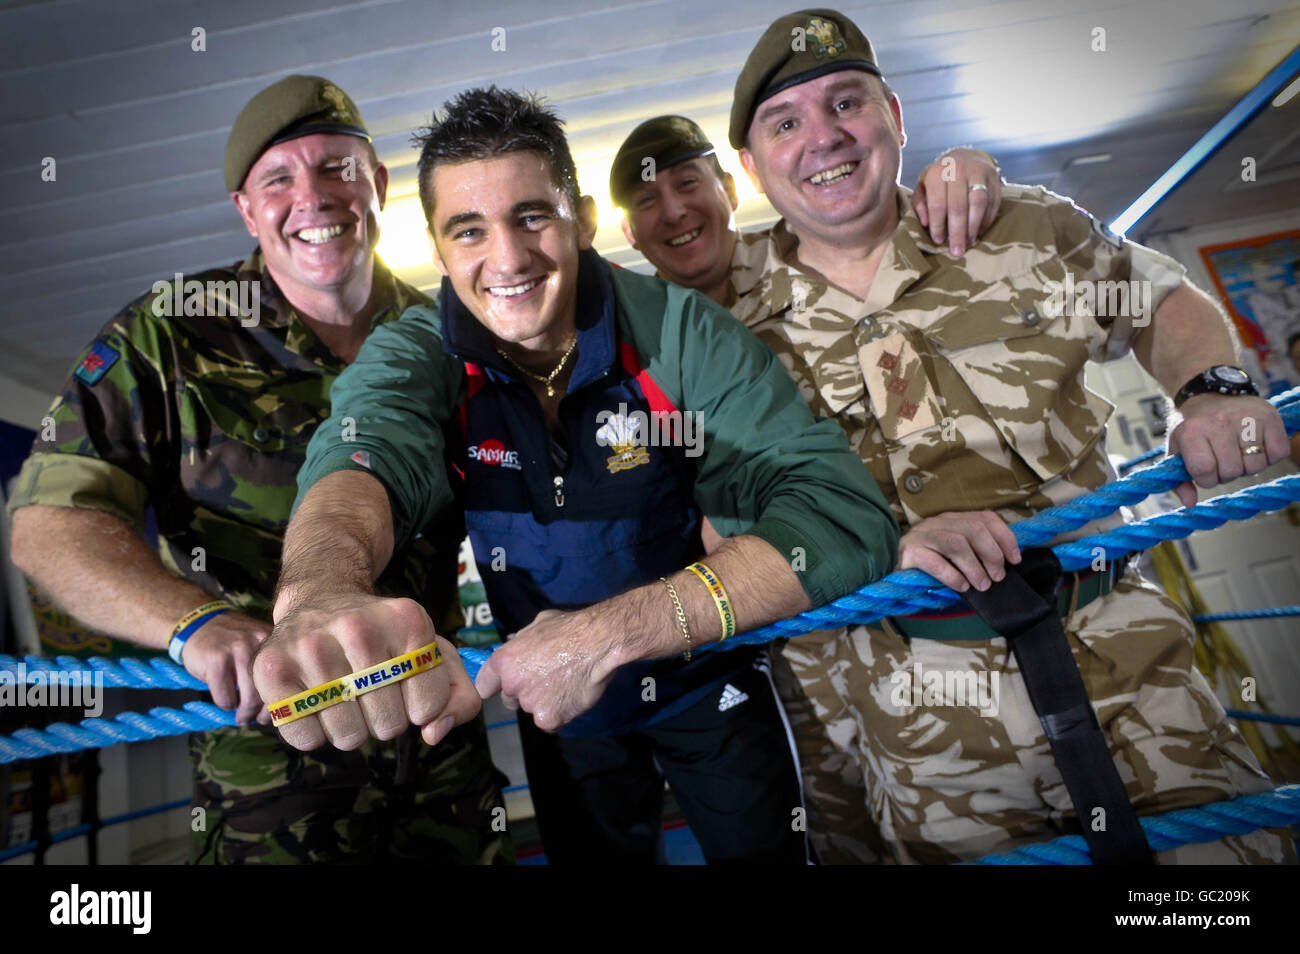 British and Commonwealth Light-Heavyweight Champion Nathan Cleverly, who defends his commonwealth title at Belfast's Odyssey Arena on October 9, is pictured with soldiers from the Royal Welsh regiment, (left to right) Warrant Officer class 2 Mal Kellheer-Griffiths, Warrant Officer class 2 Dave Matthews and Captain Rob Rees,, as Nathan shows his support for the The Royal Welsh and the great job they are doing by fully endorsing 'The Soldiers Charity' and wearing the 'Support the Royal Welsh in Afghanistan' wrist band. Stock Photo